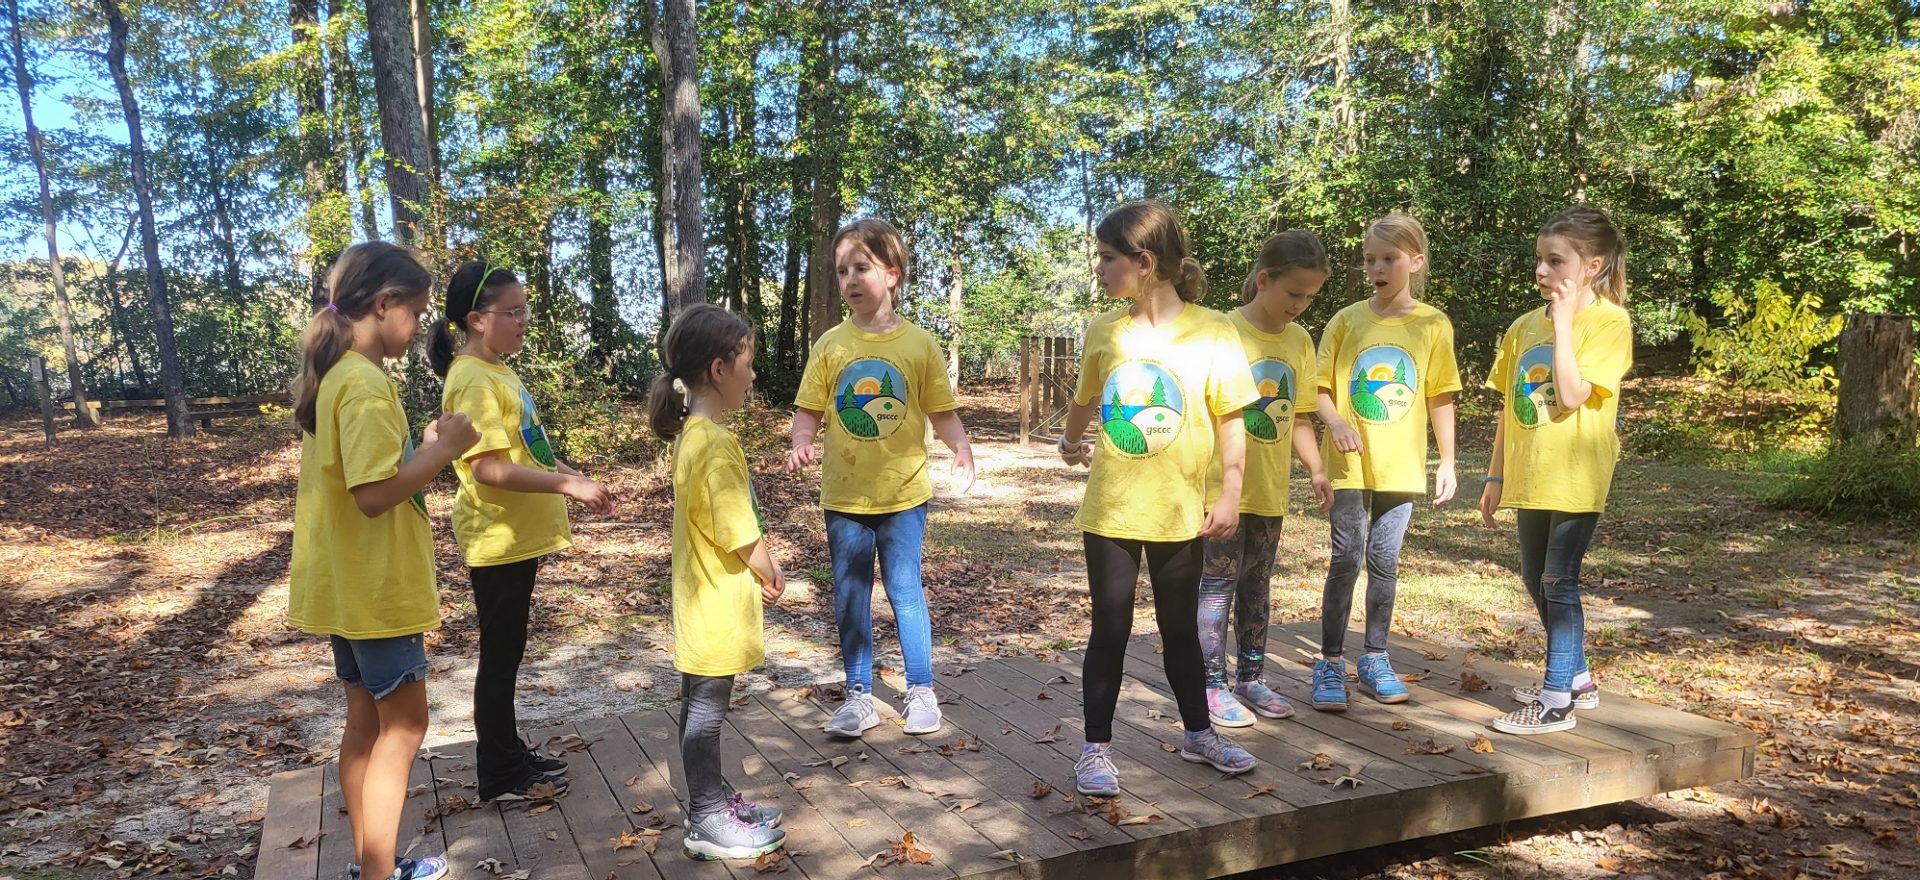  Girl Scouts hiking on the Appalachian Trail 